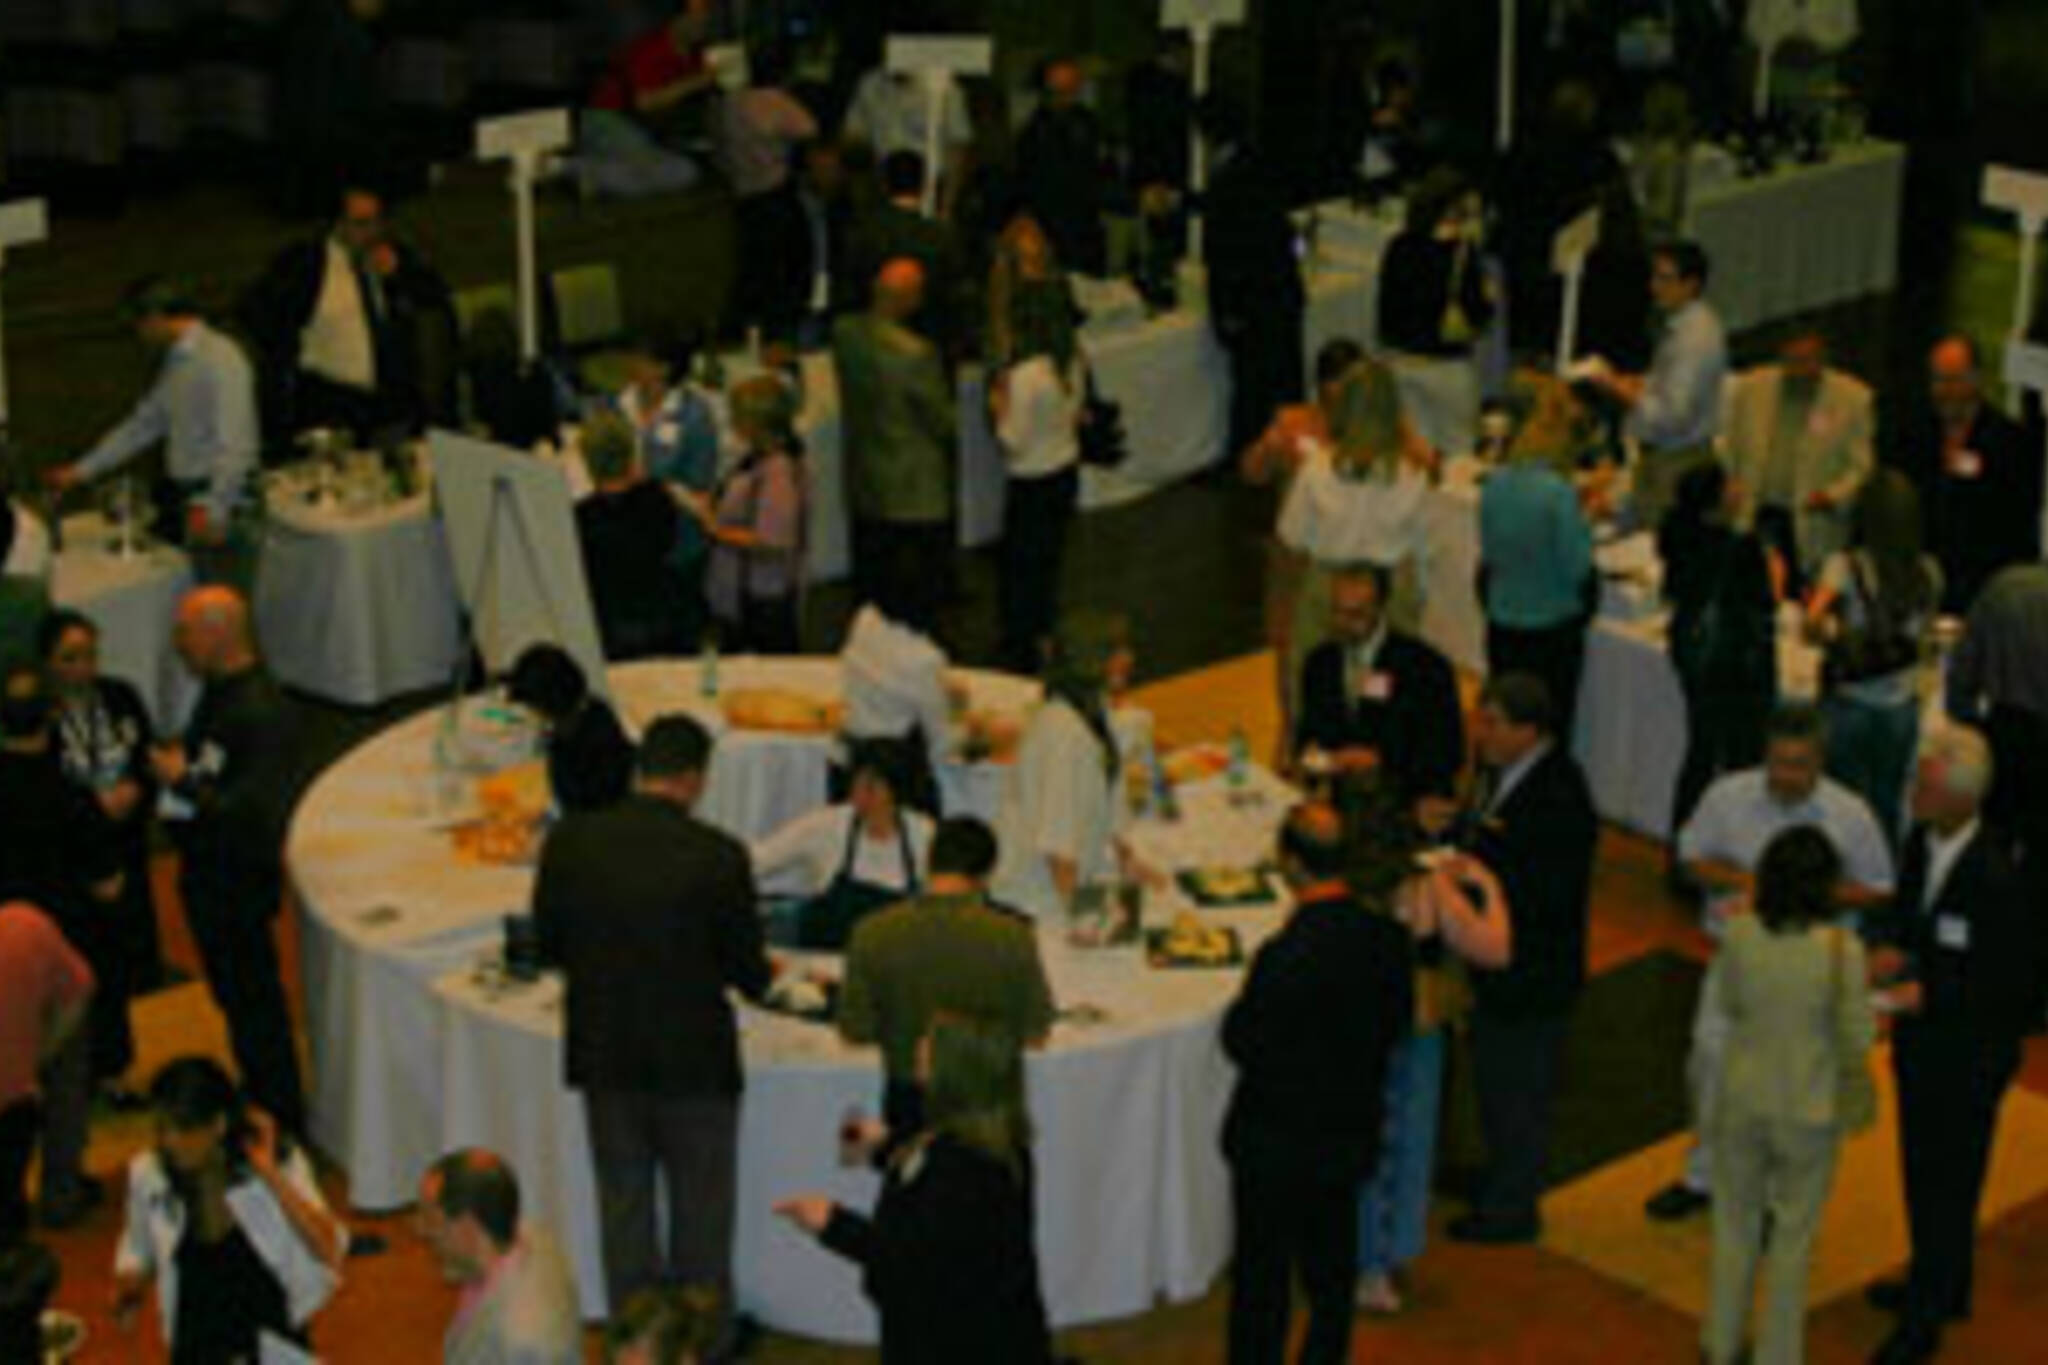 The tasting floor.  The circular table at the centre was filled with cheese.